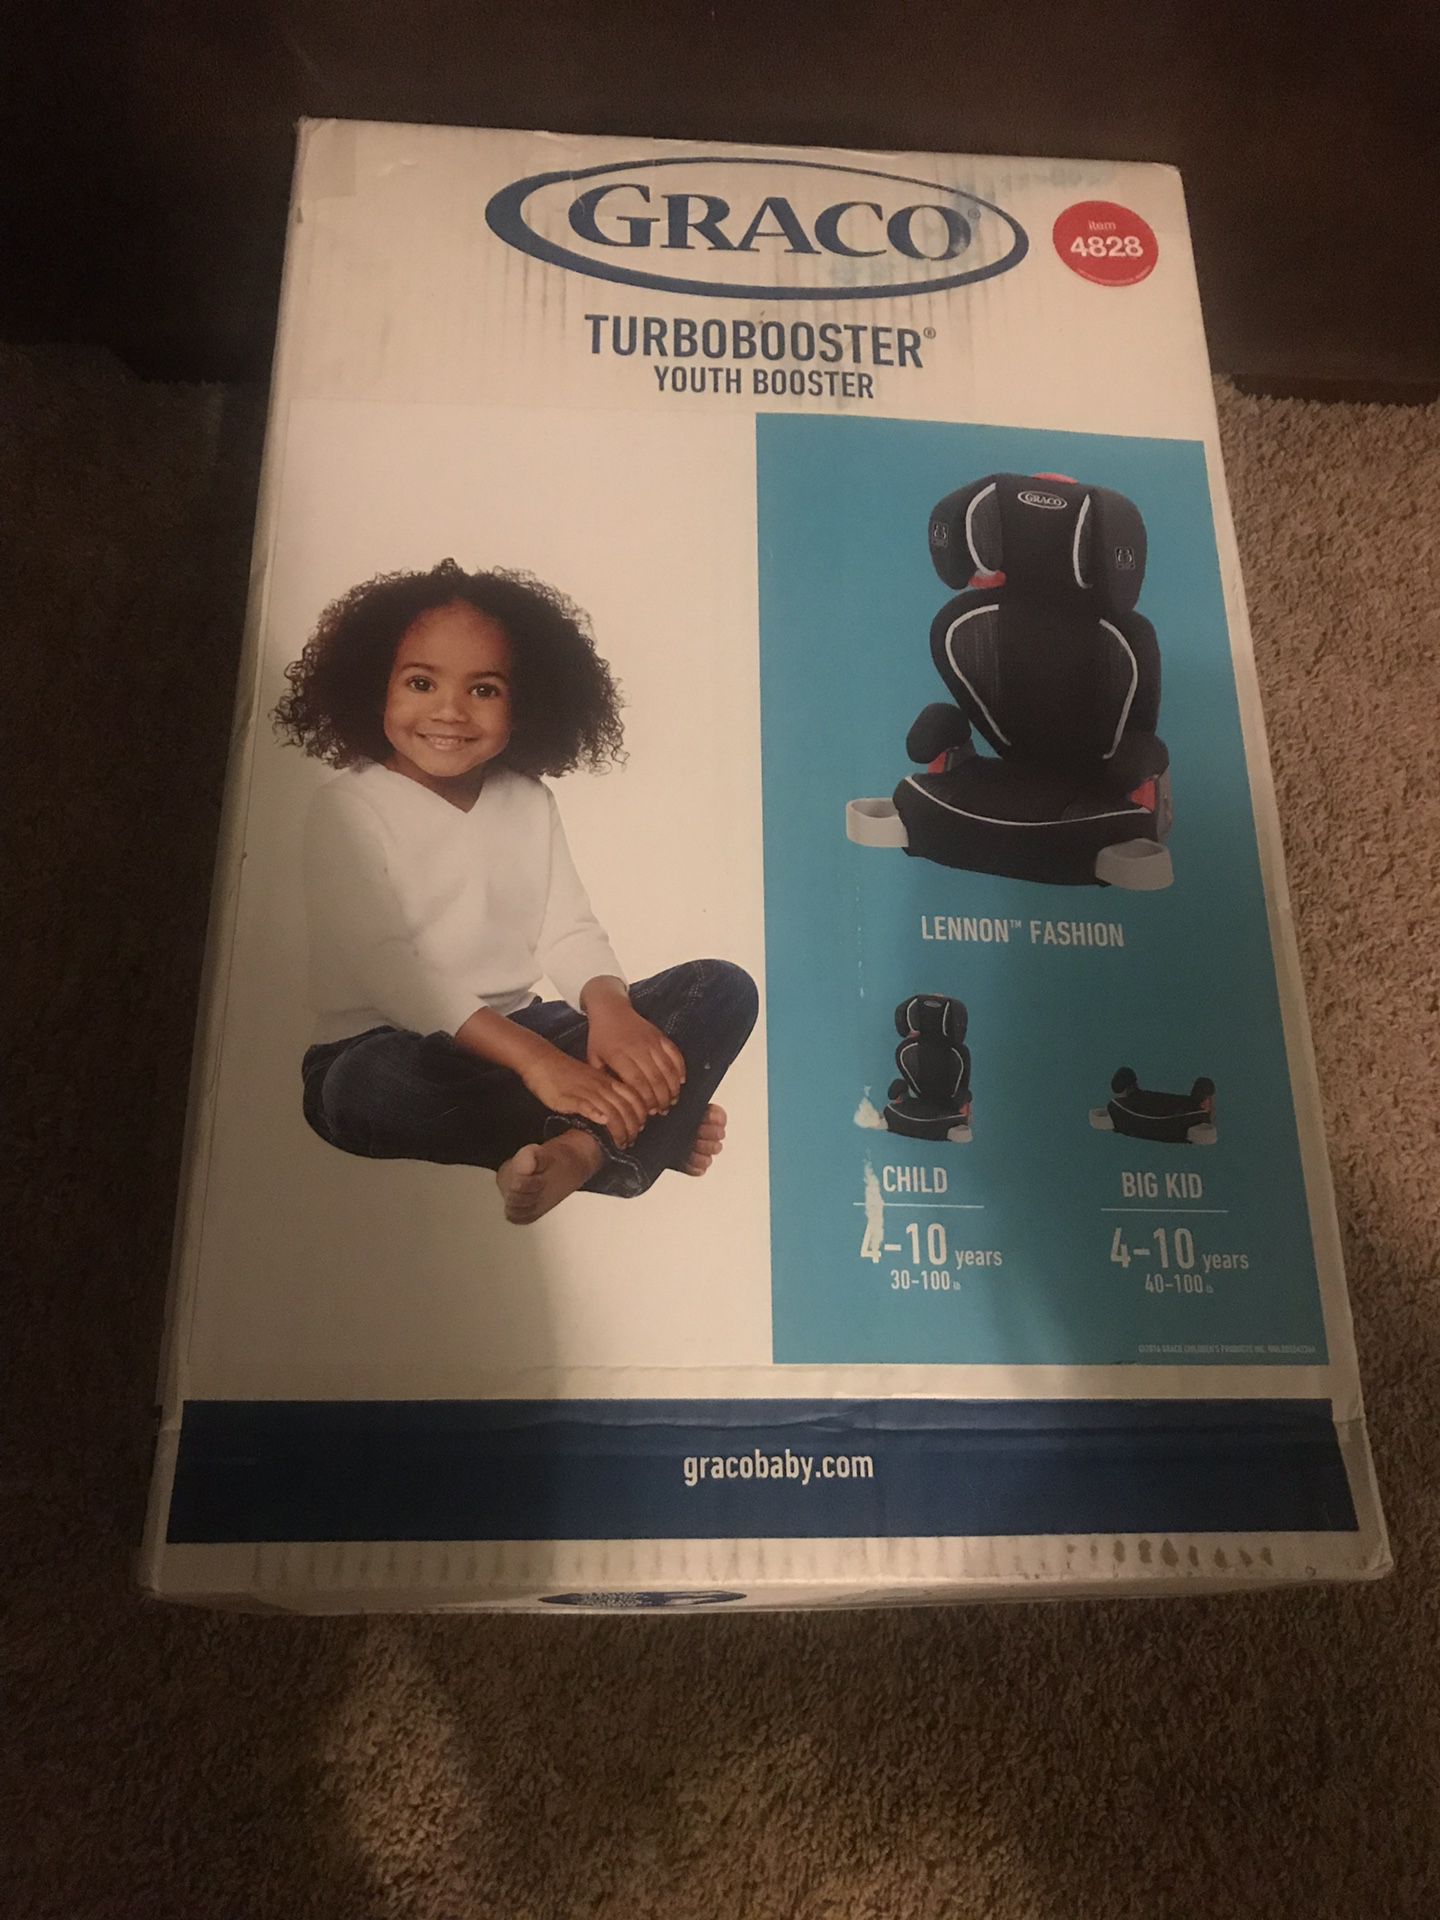 If you see this post, it’s available. Booster seat brand new and never used.